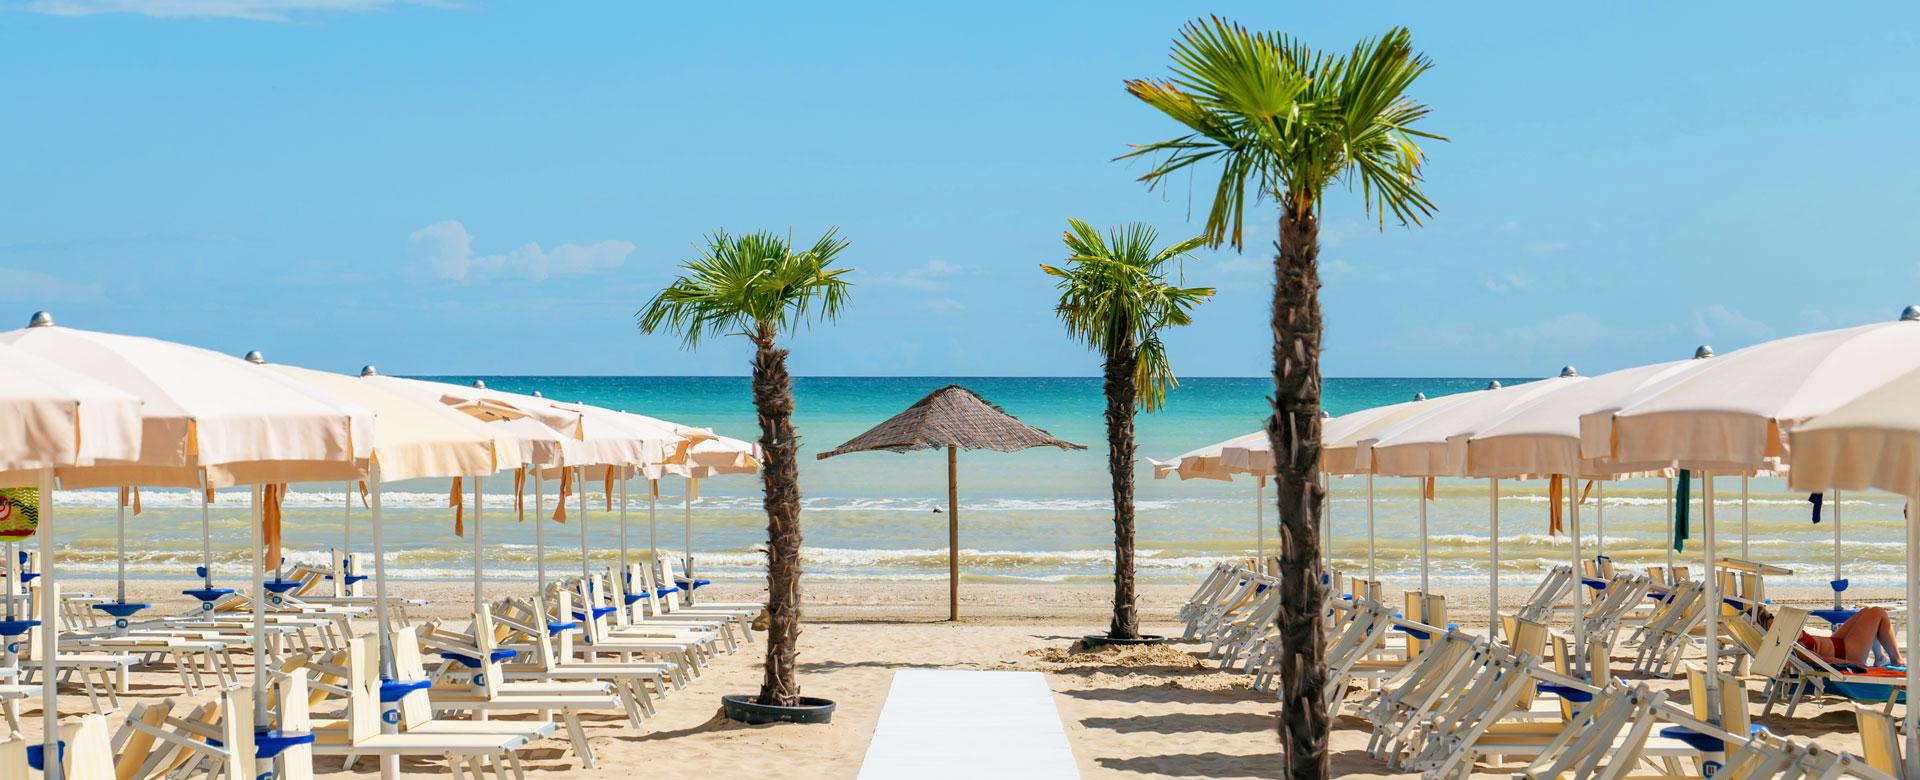 Beach with umbrellas, sunbeds, and palm trees, view of the blue sea.